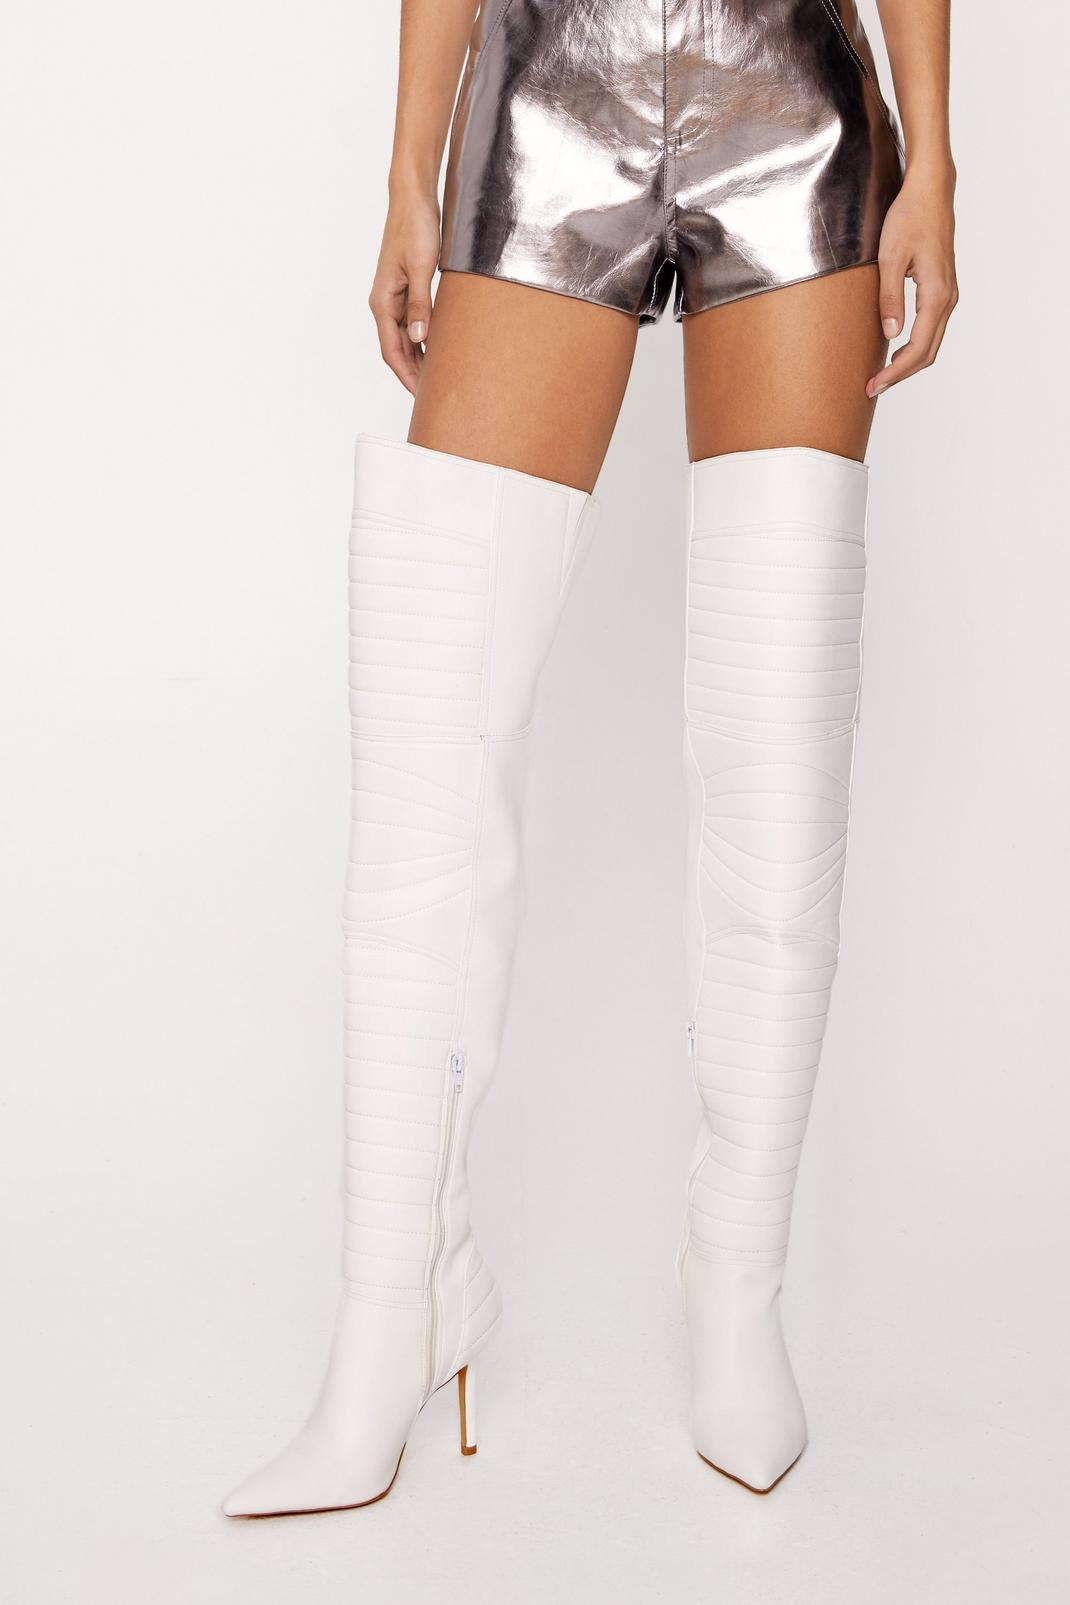 White Faux Leather Padded Motocross Thigh High Boots image number 1